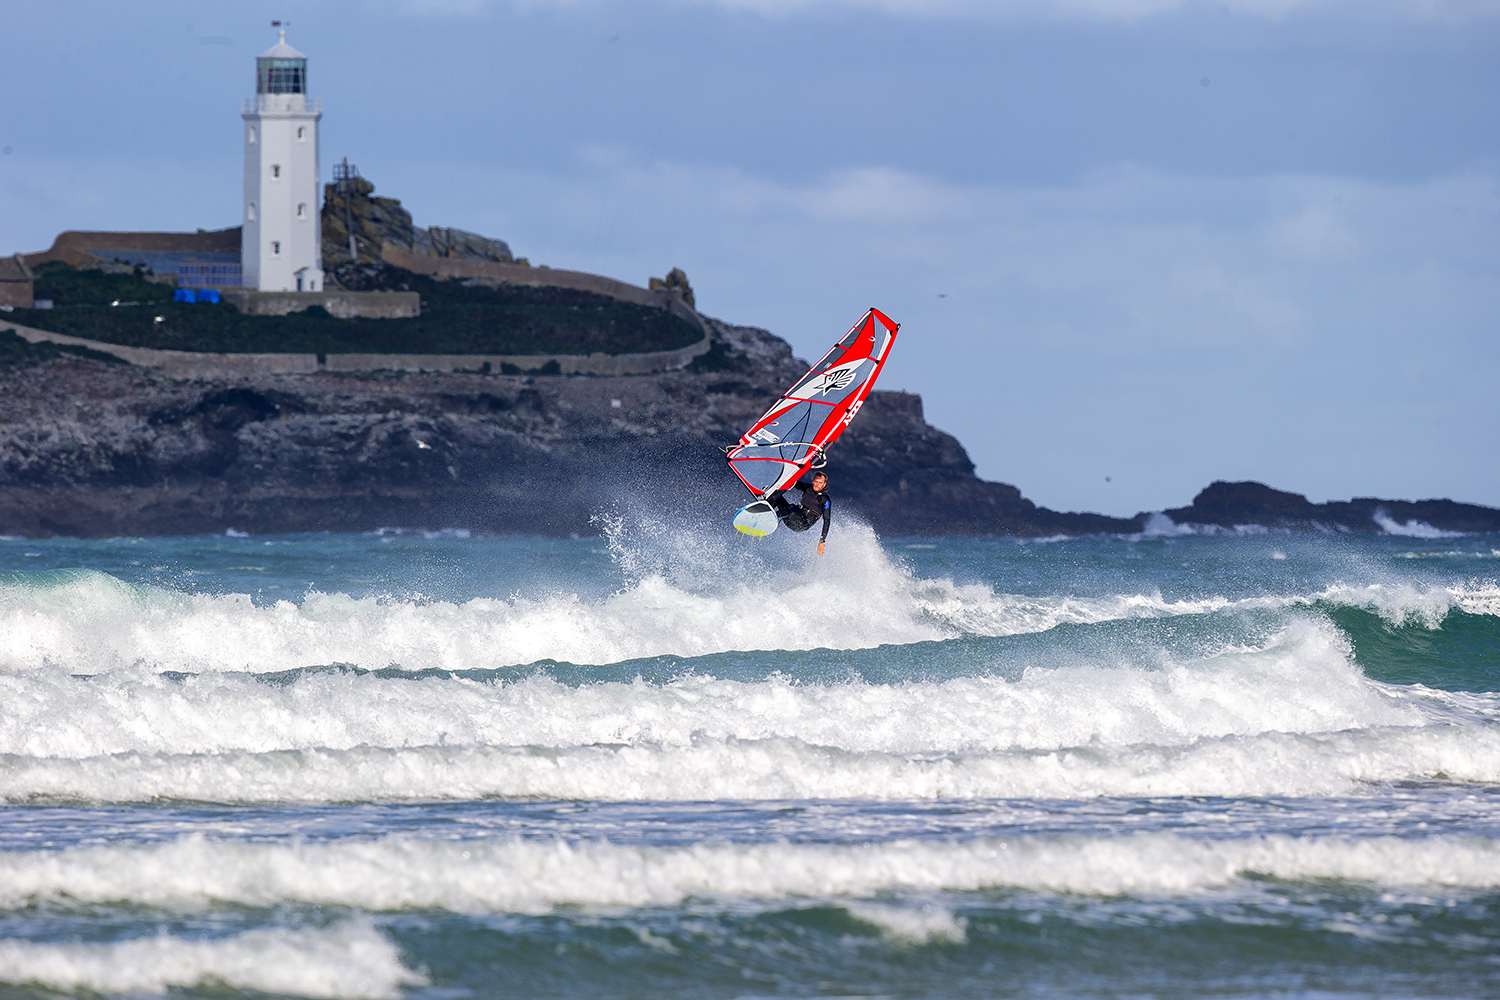 Ripping in Cornwall